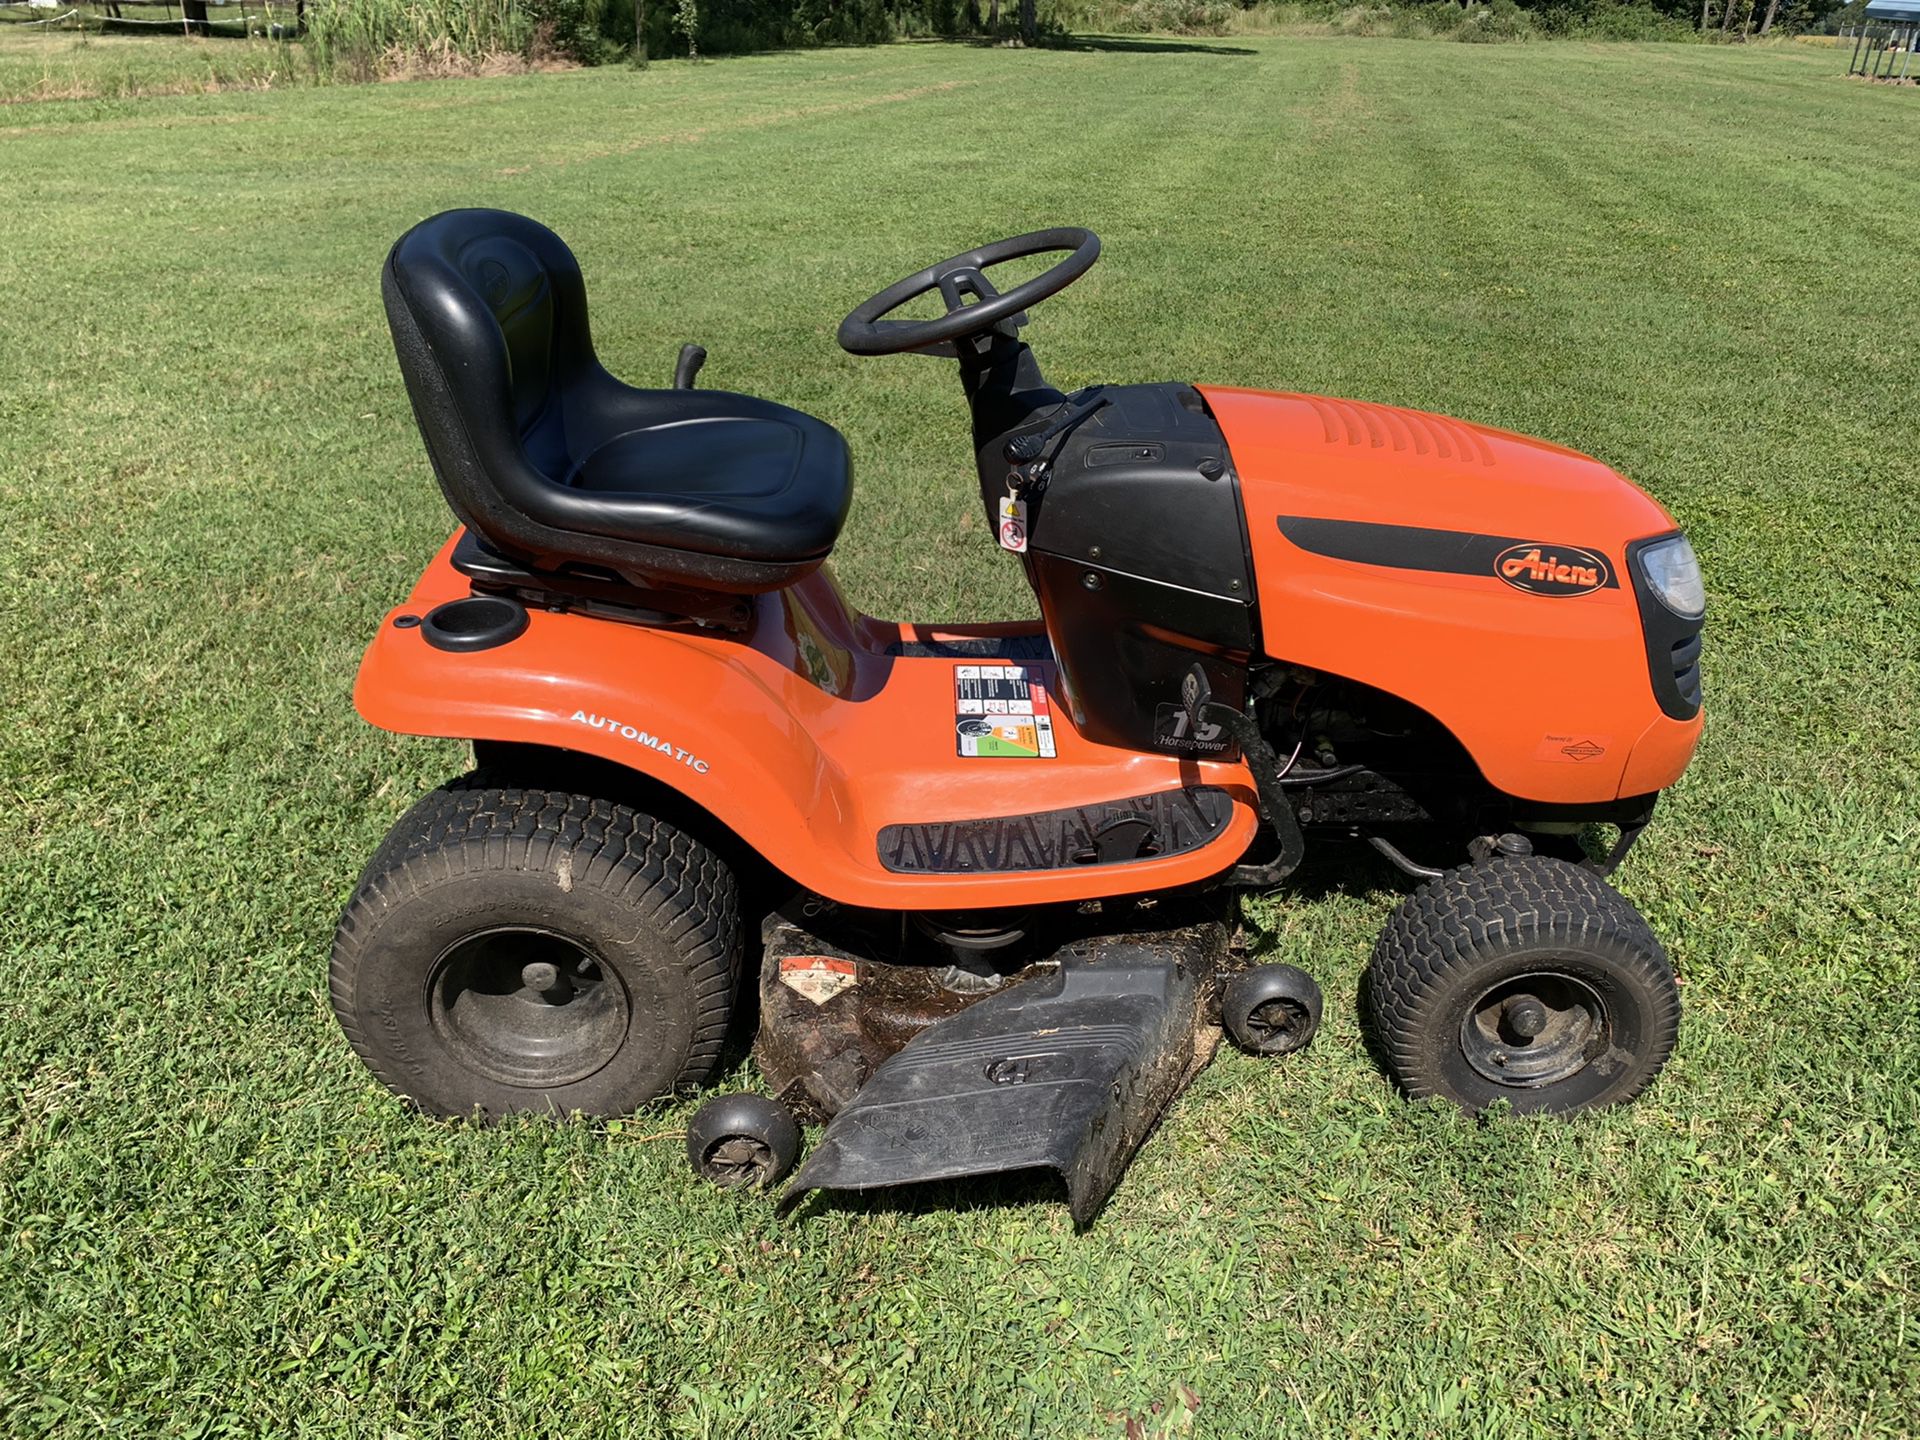 Ariens 19hp 42 inch lawn mower for Sale or Trade.